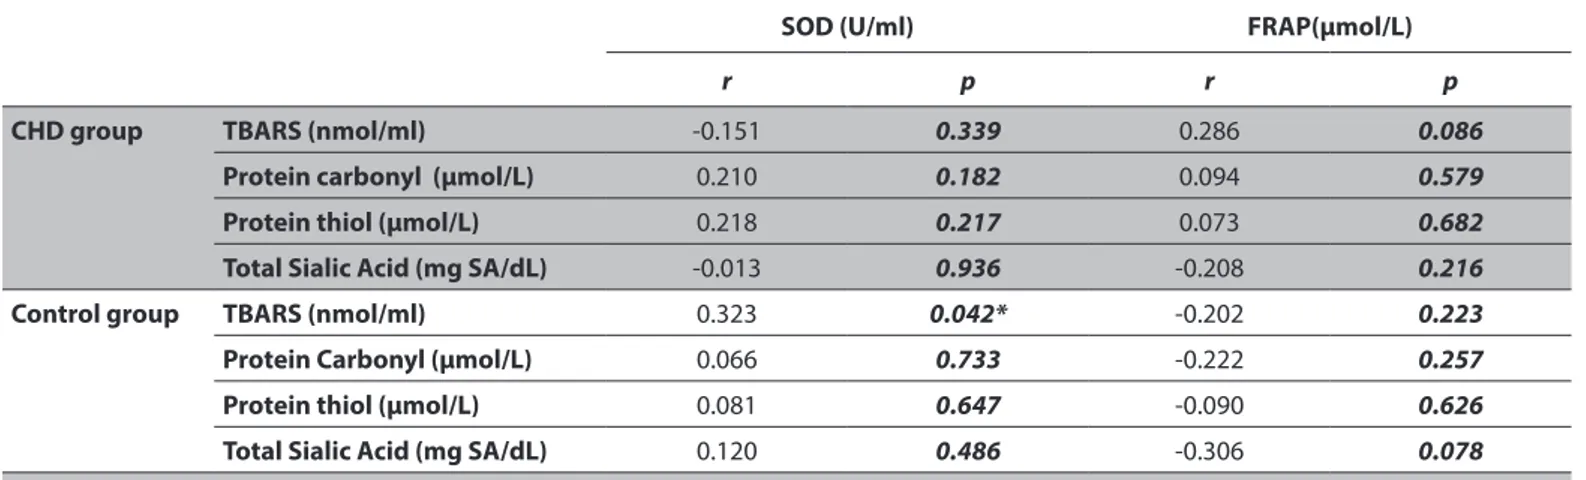 Table 6. Relationship between SOD-FARP and TBARS, protein carbonyl, protein thiol, total sialic acid in the groups